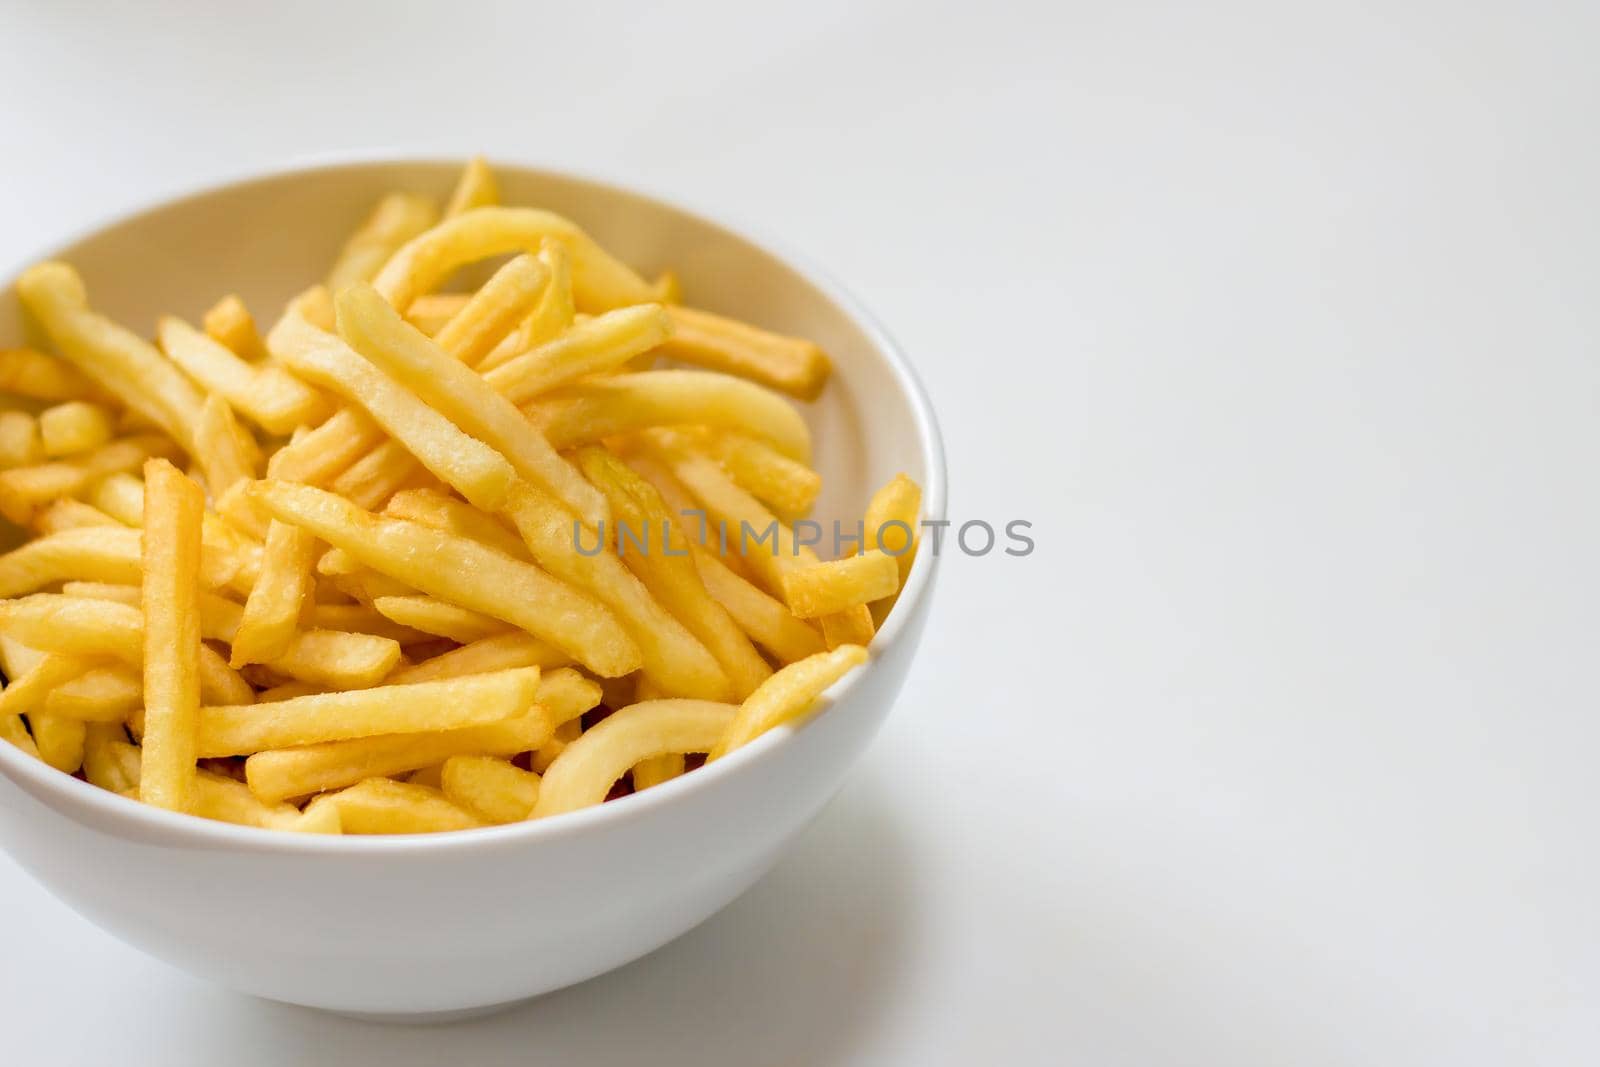 Bowl of french fries on a white background by magicbones